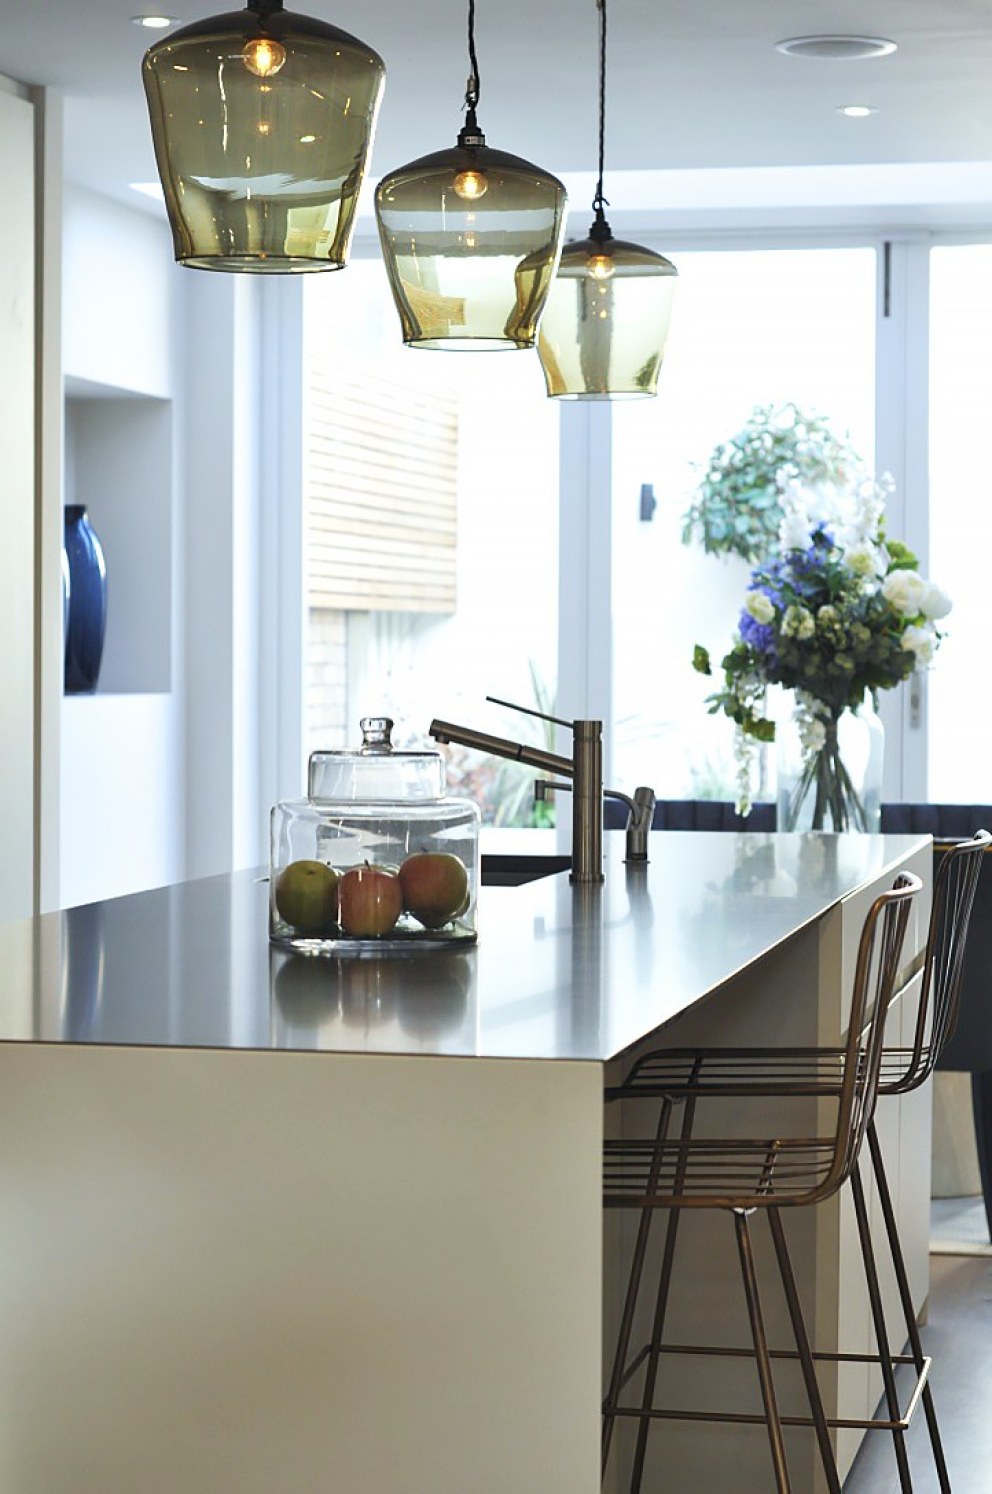 Sloane Square Townhouse | Kitchen & Dining Room | Interior Designers